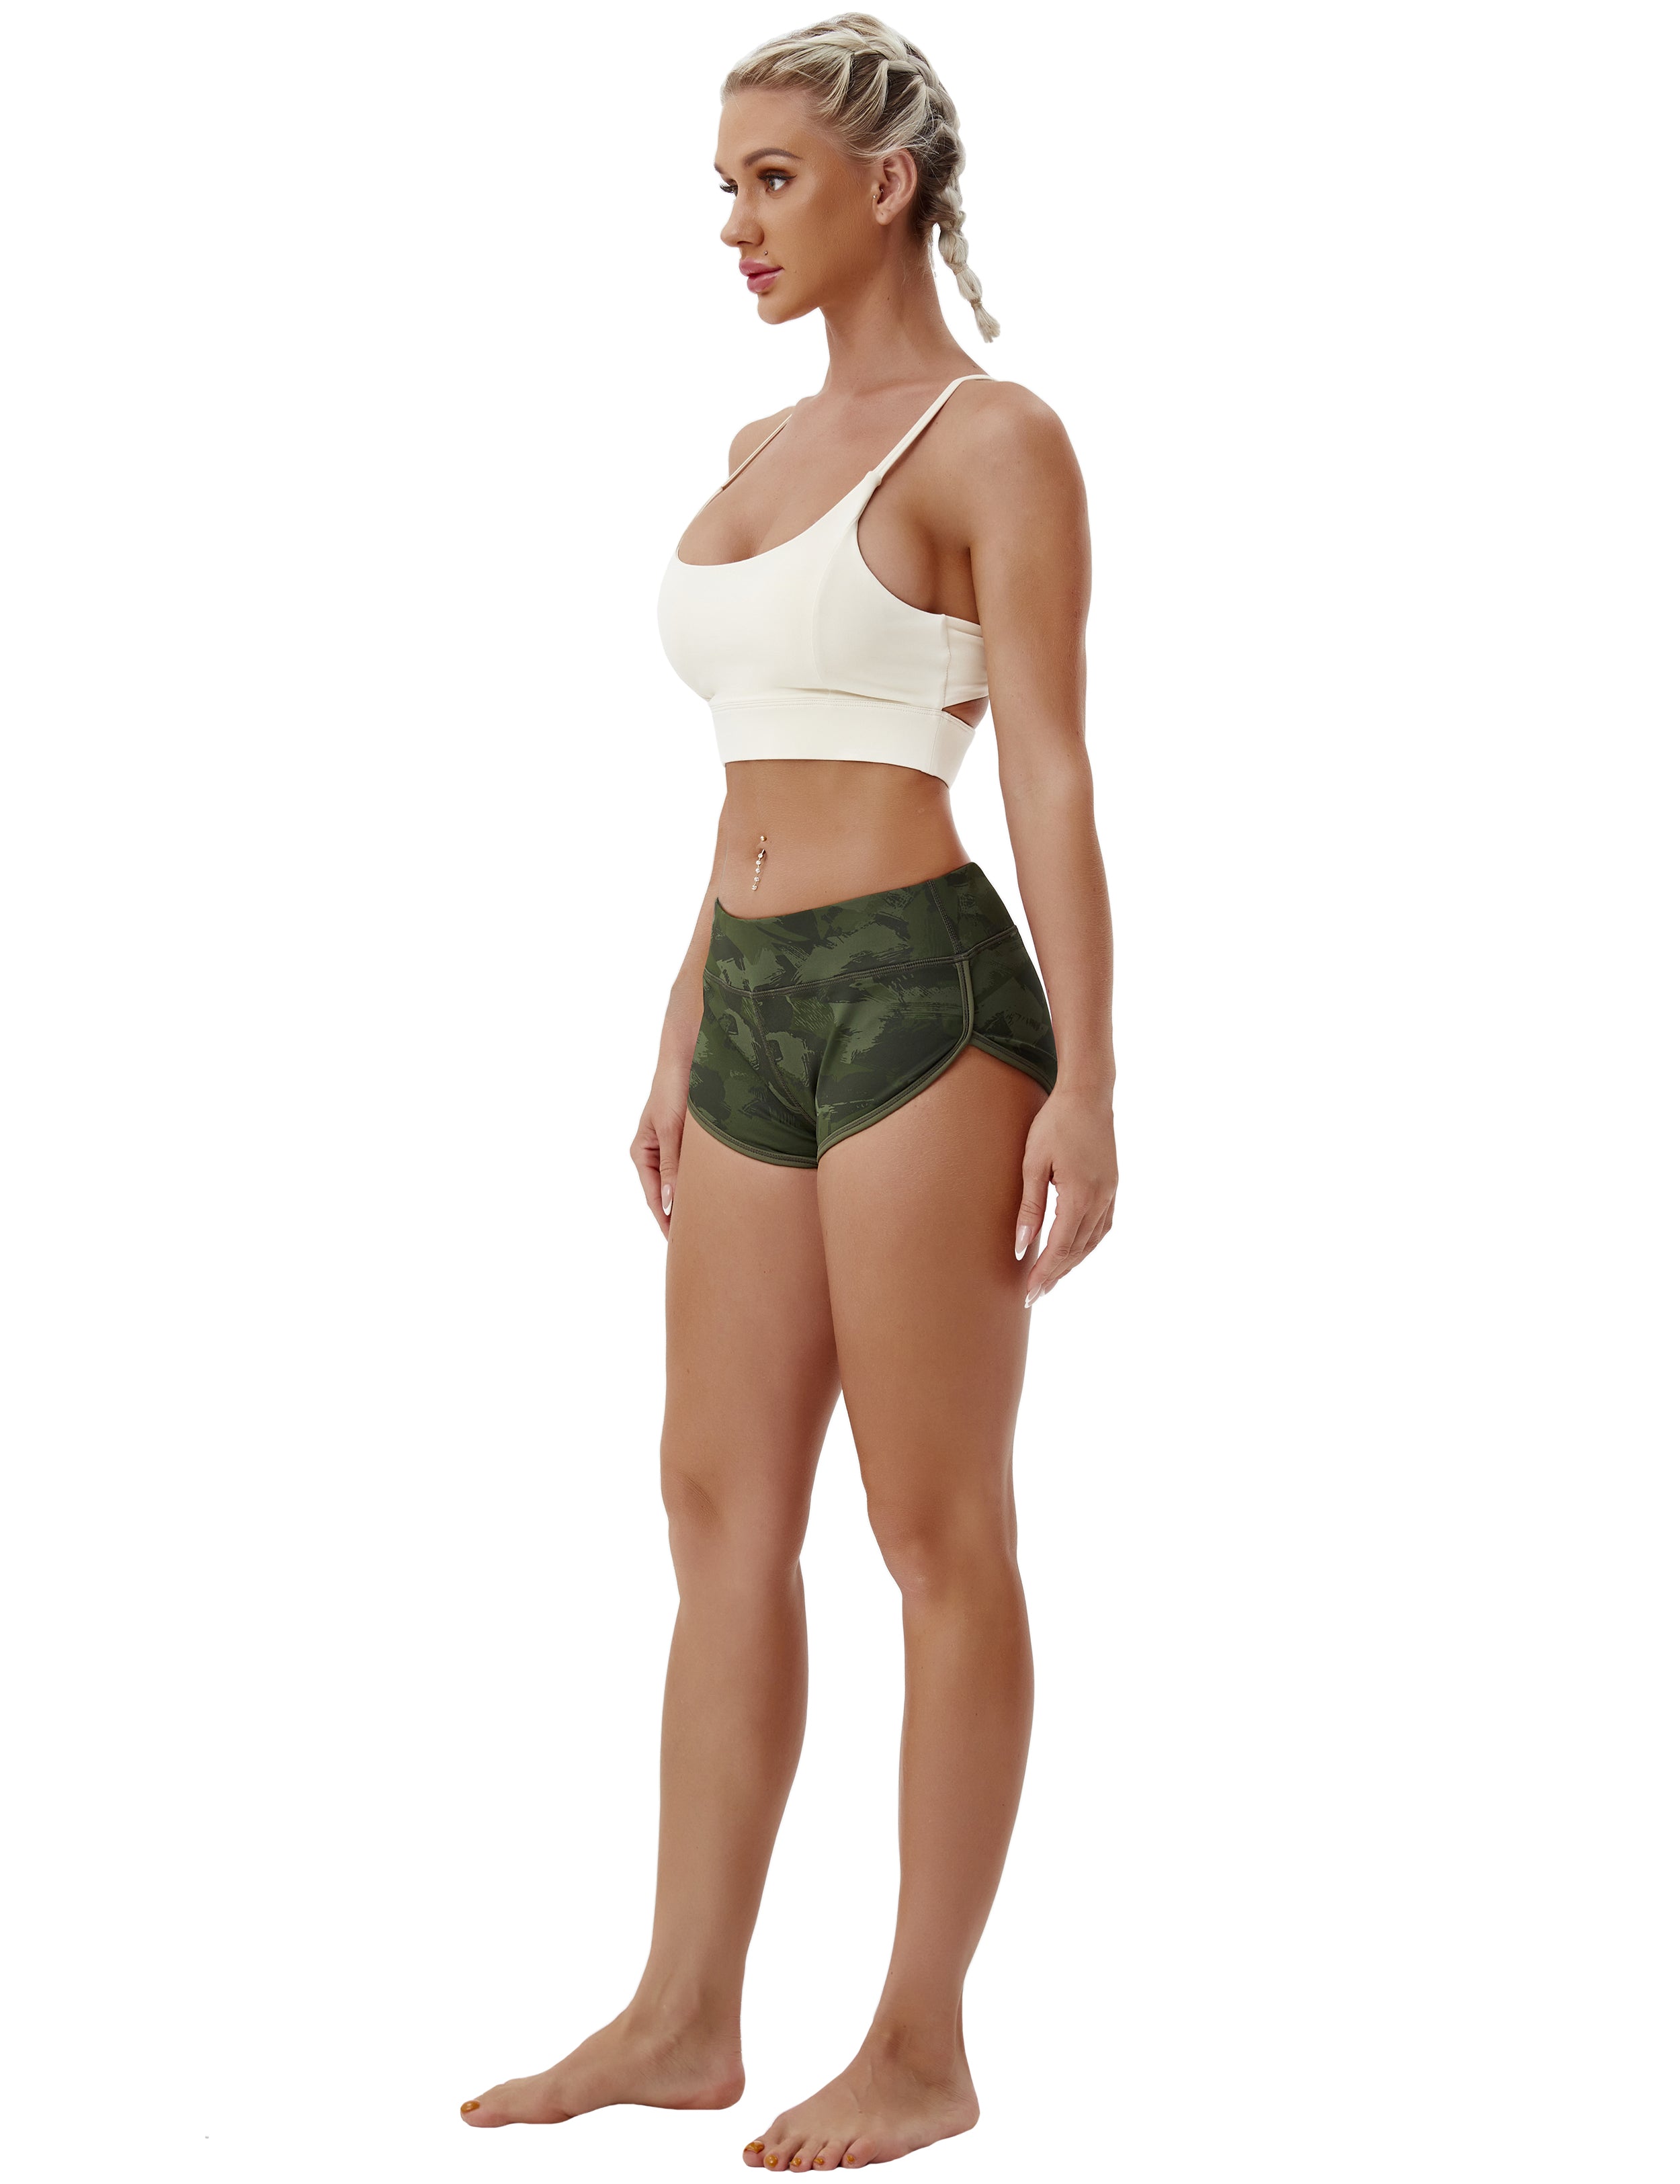 Printed Booty Gym Shorts green brushcamo Sleek, soft, smooth and totally comfortable: our newest sexy style is here. Softest-ever fabric High elasticity High density 4-way stretch Fabric doesn't attract lint easily No see-through Moisture-wicking Machine wash 78% Polyester, 22% Spandex